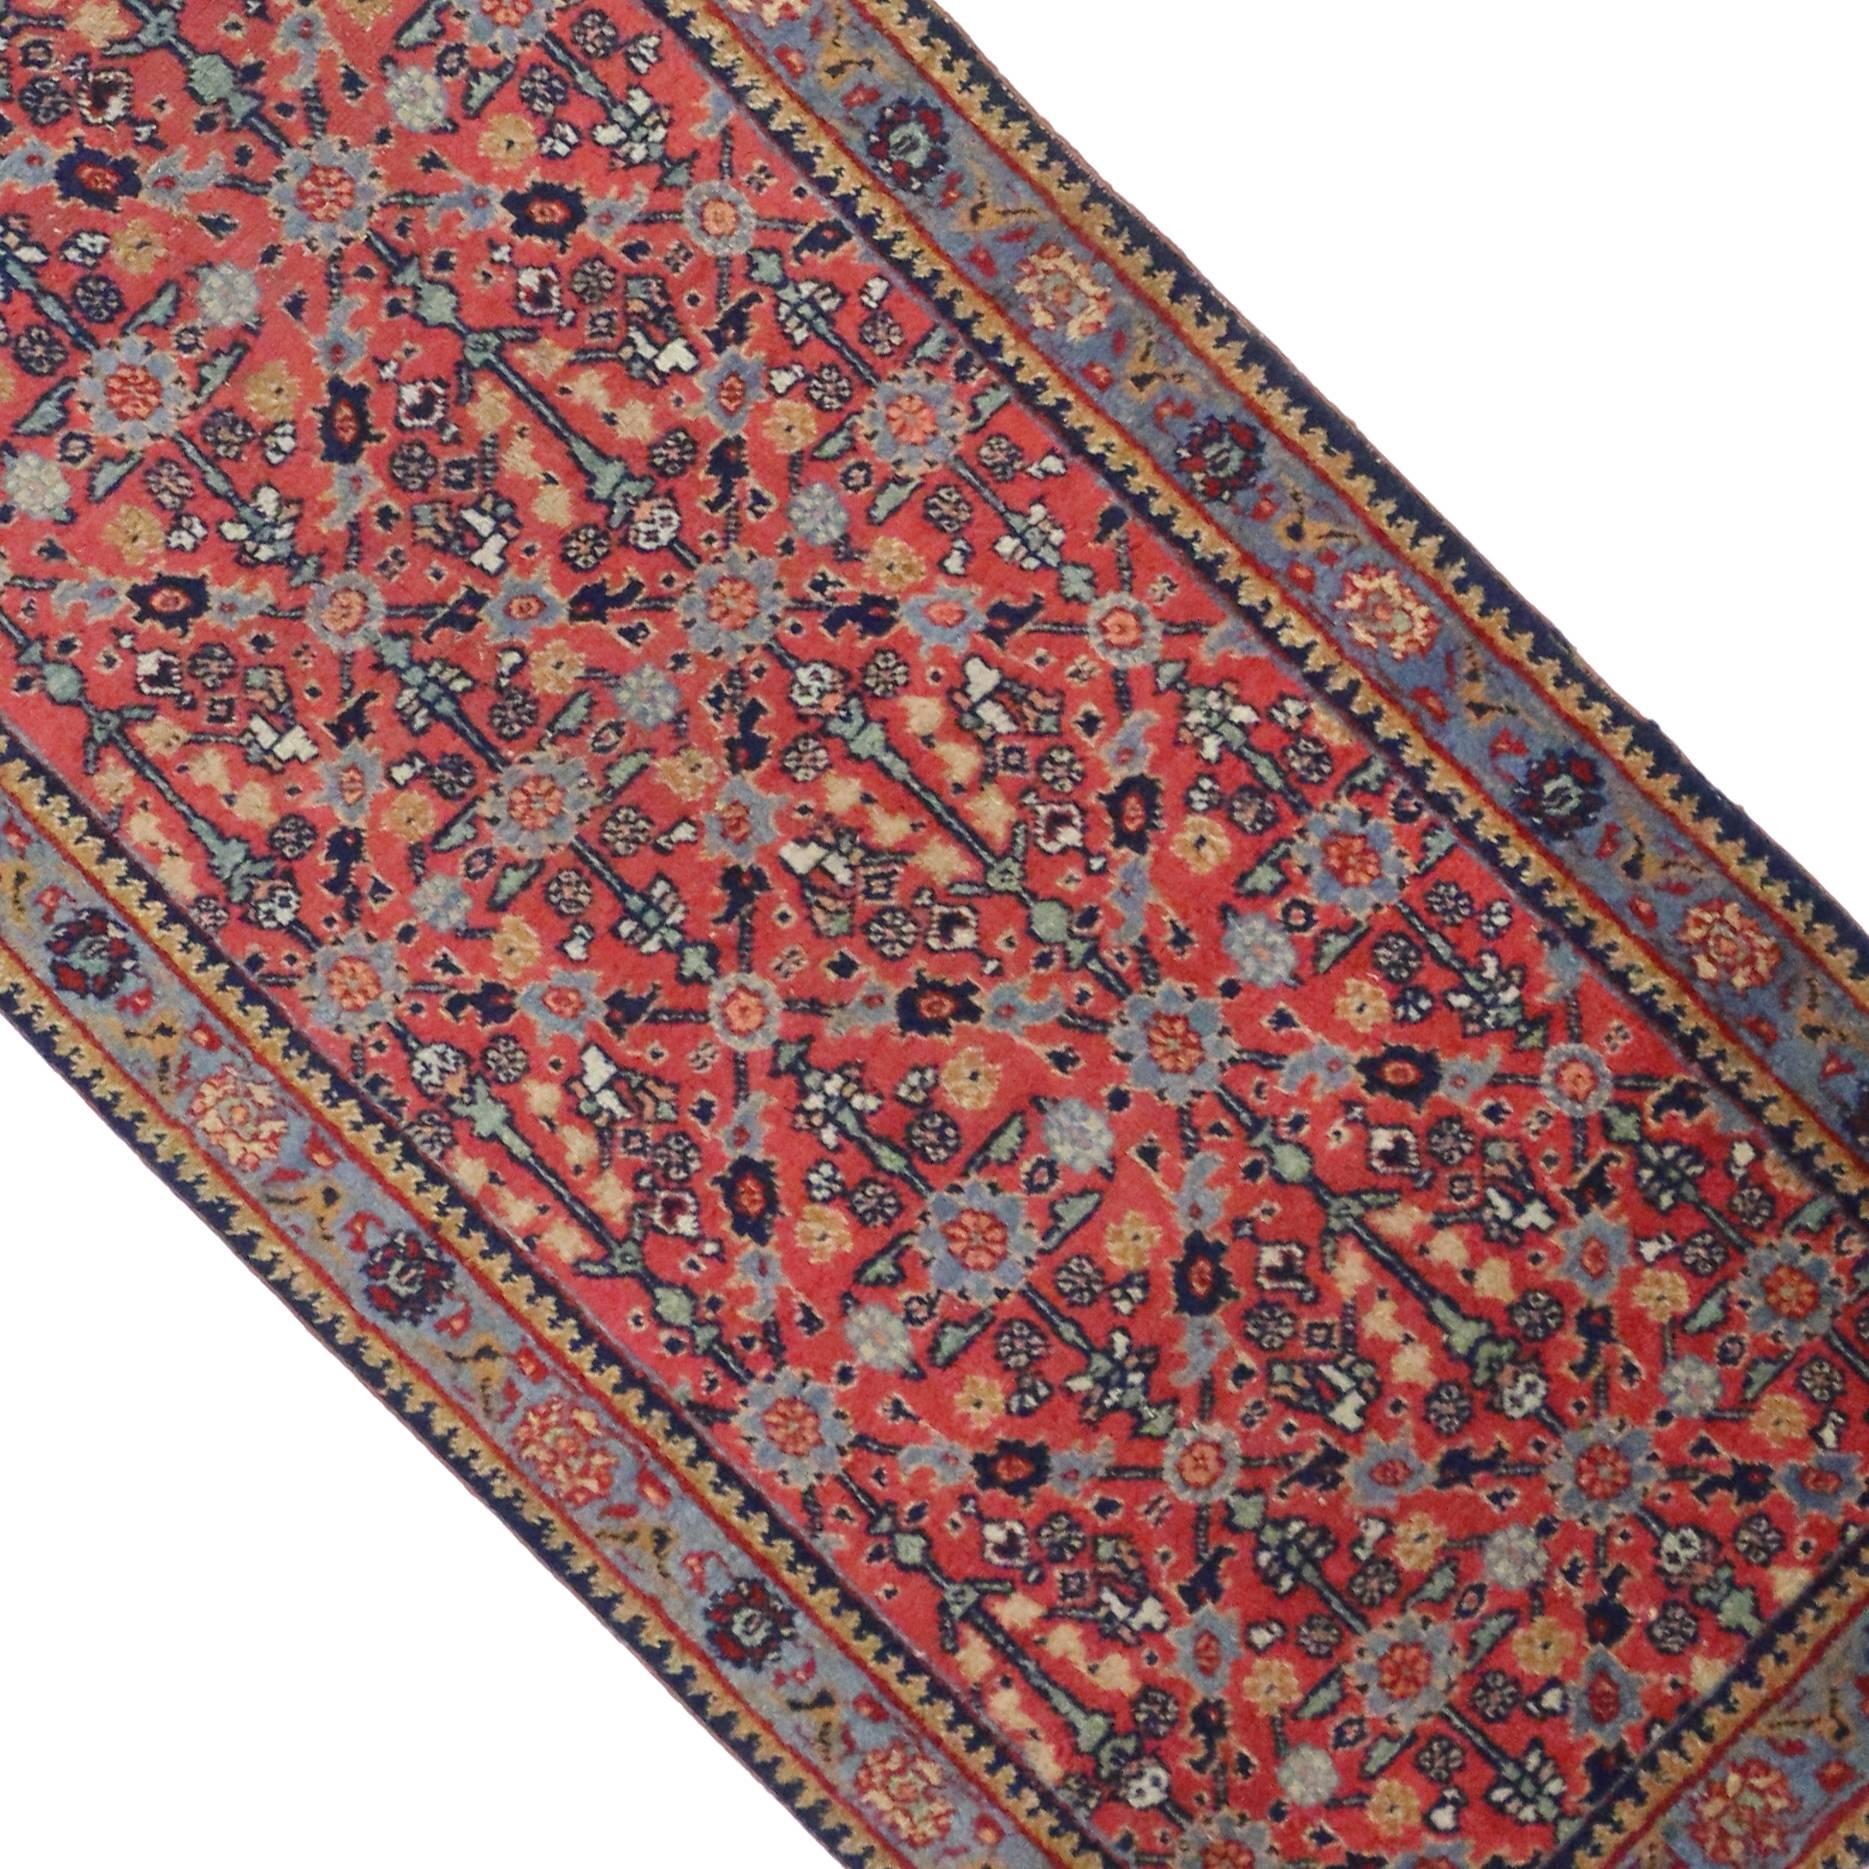 20th Century Antique Persian Tabriz Carpet Runner with Modern Traditional Style